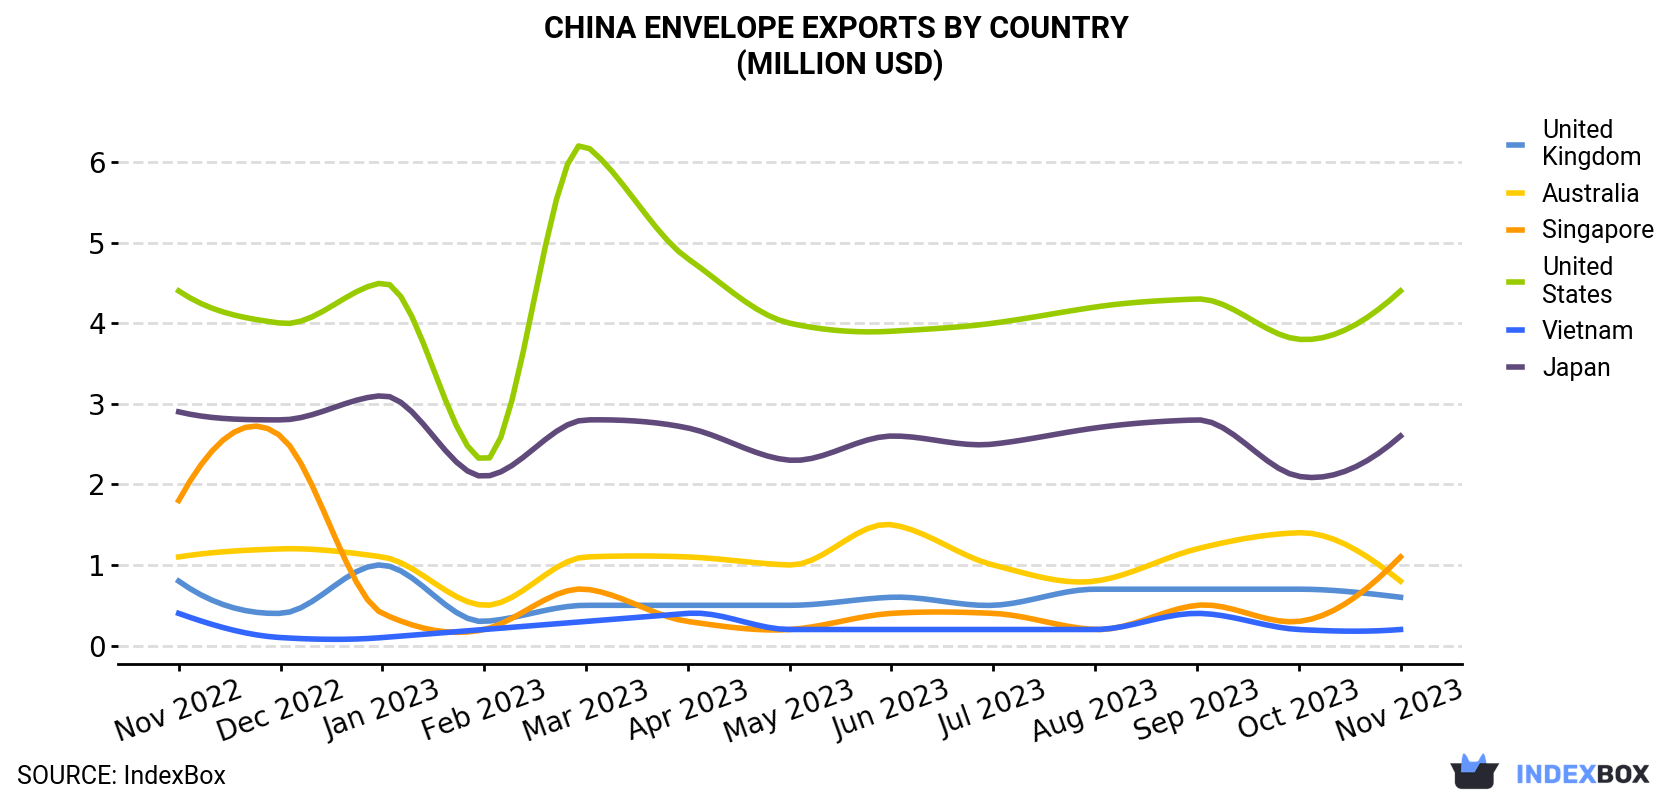 China Envelope Exports By Country (Million USD)